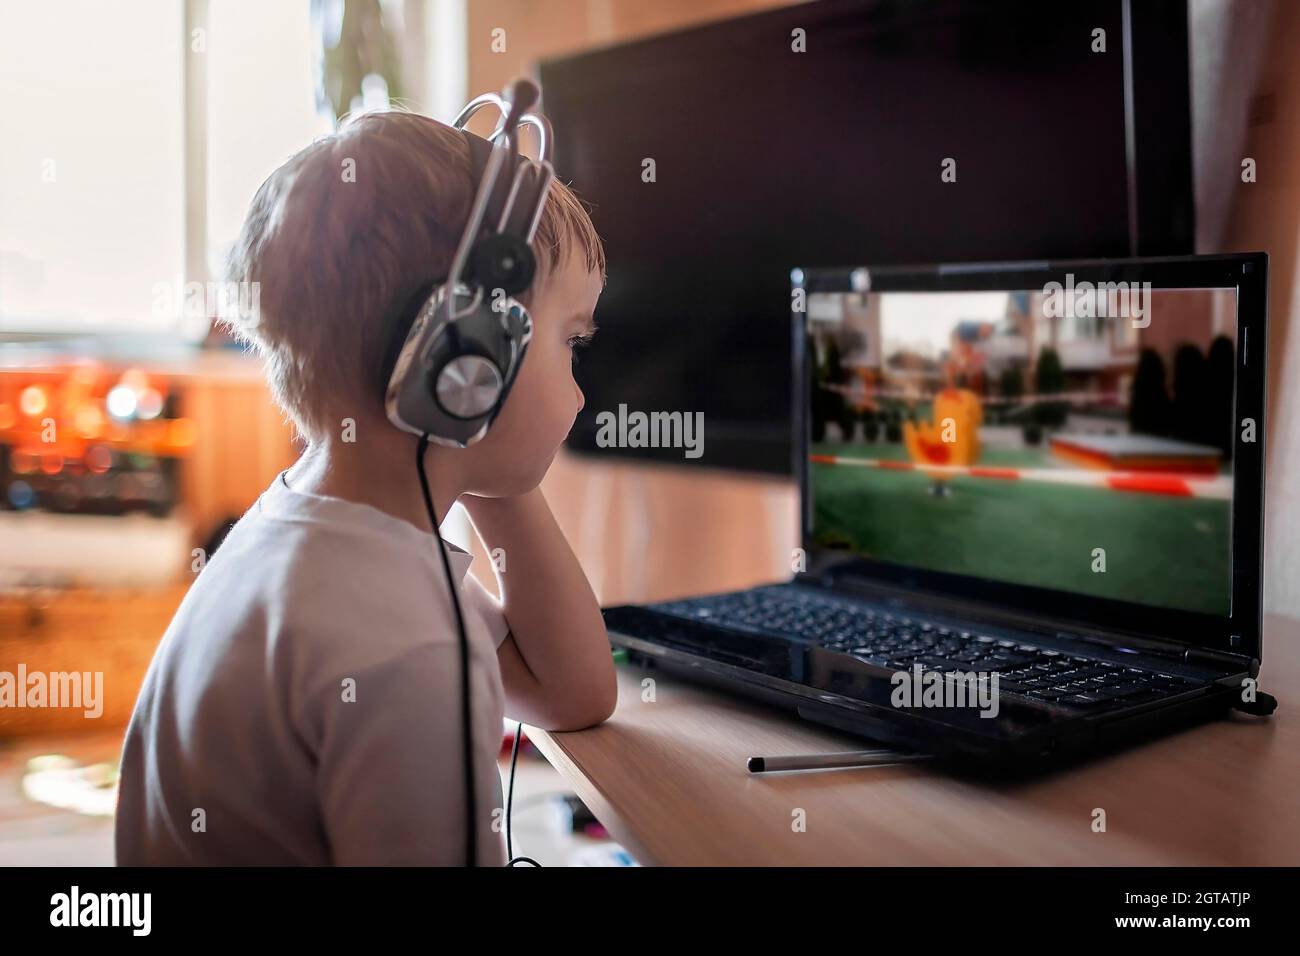 A Boy Watching Hot News About Closed Sport Ground Playground Via Internet The Screen Stock Photo - Alamy